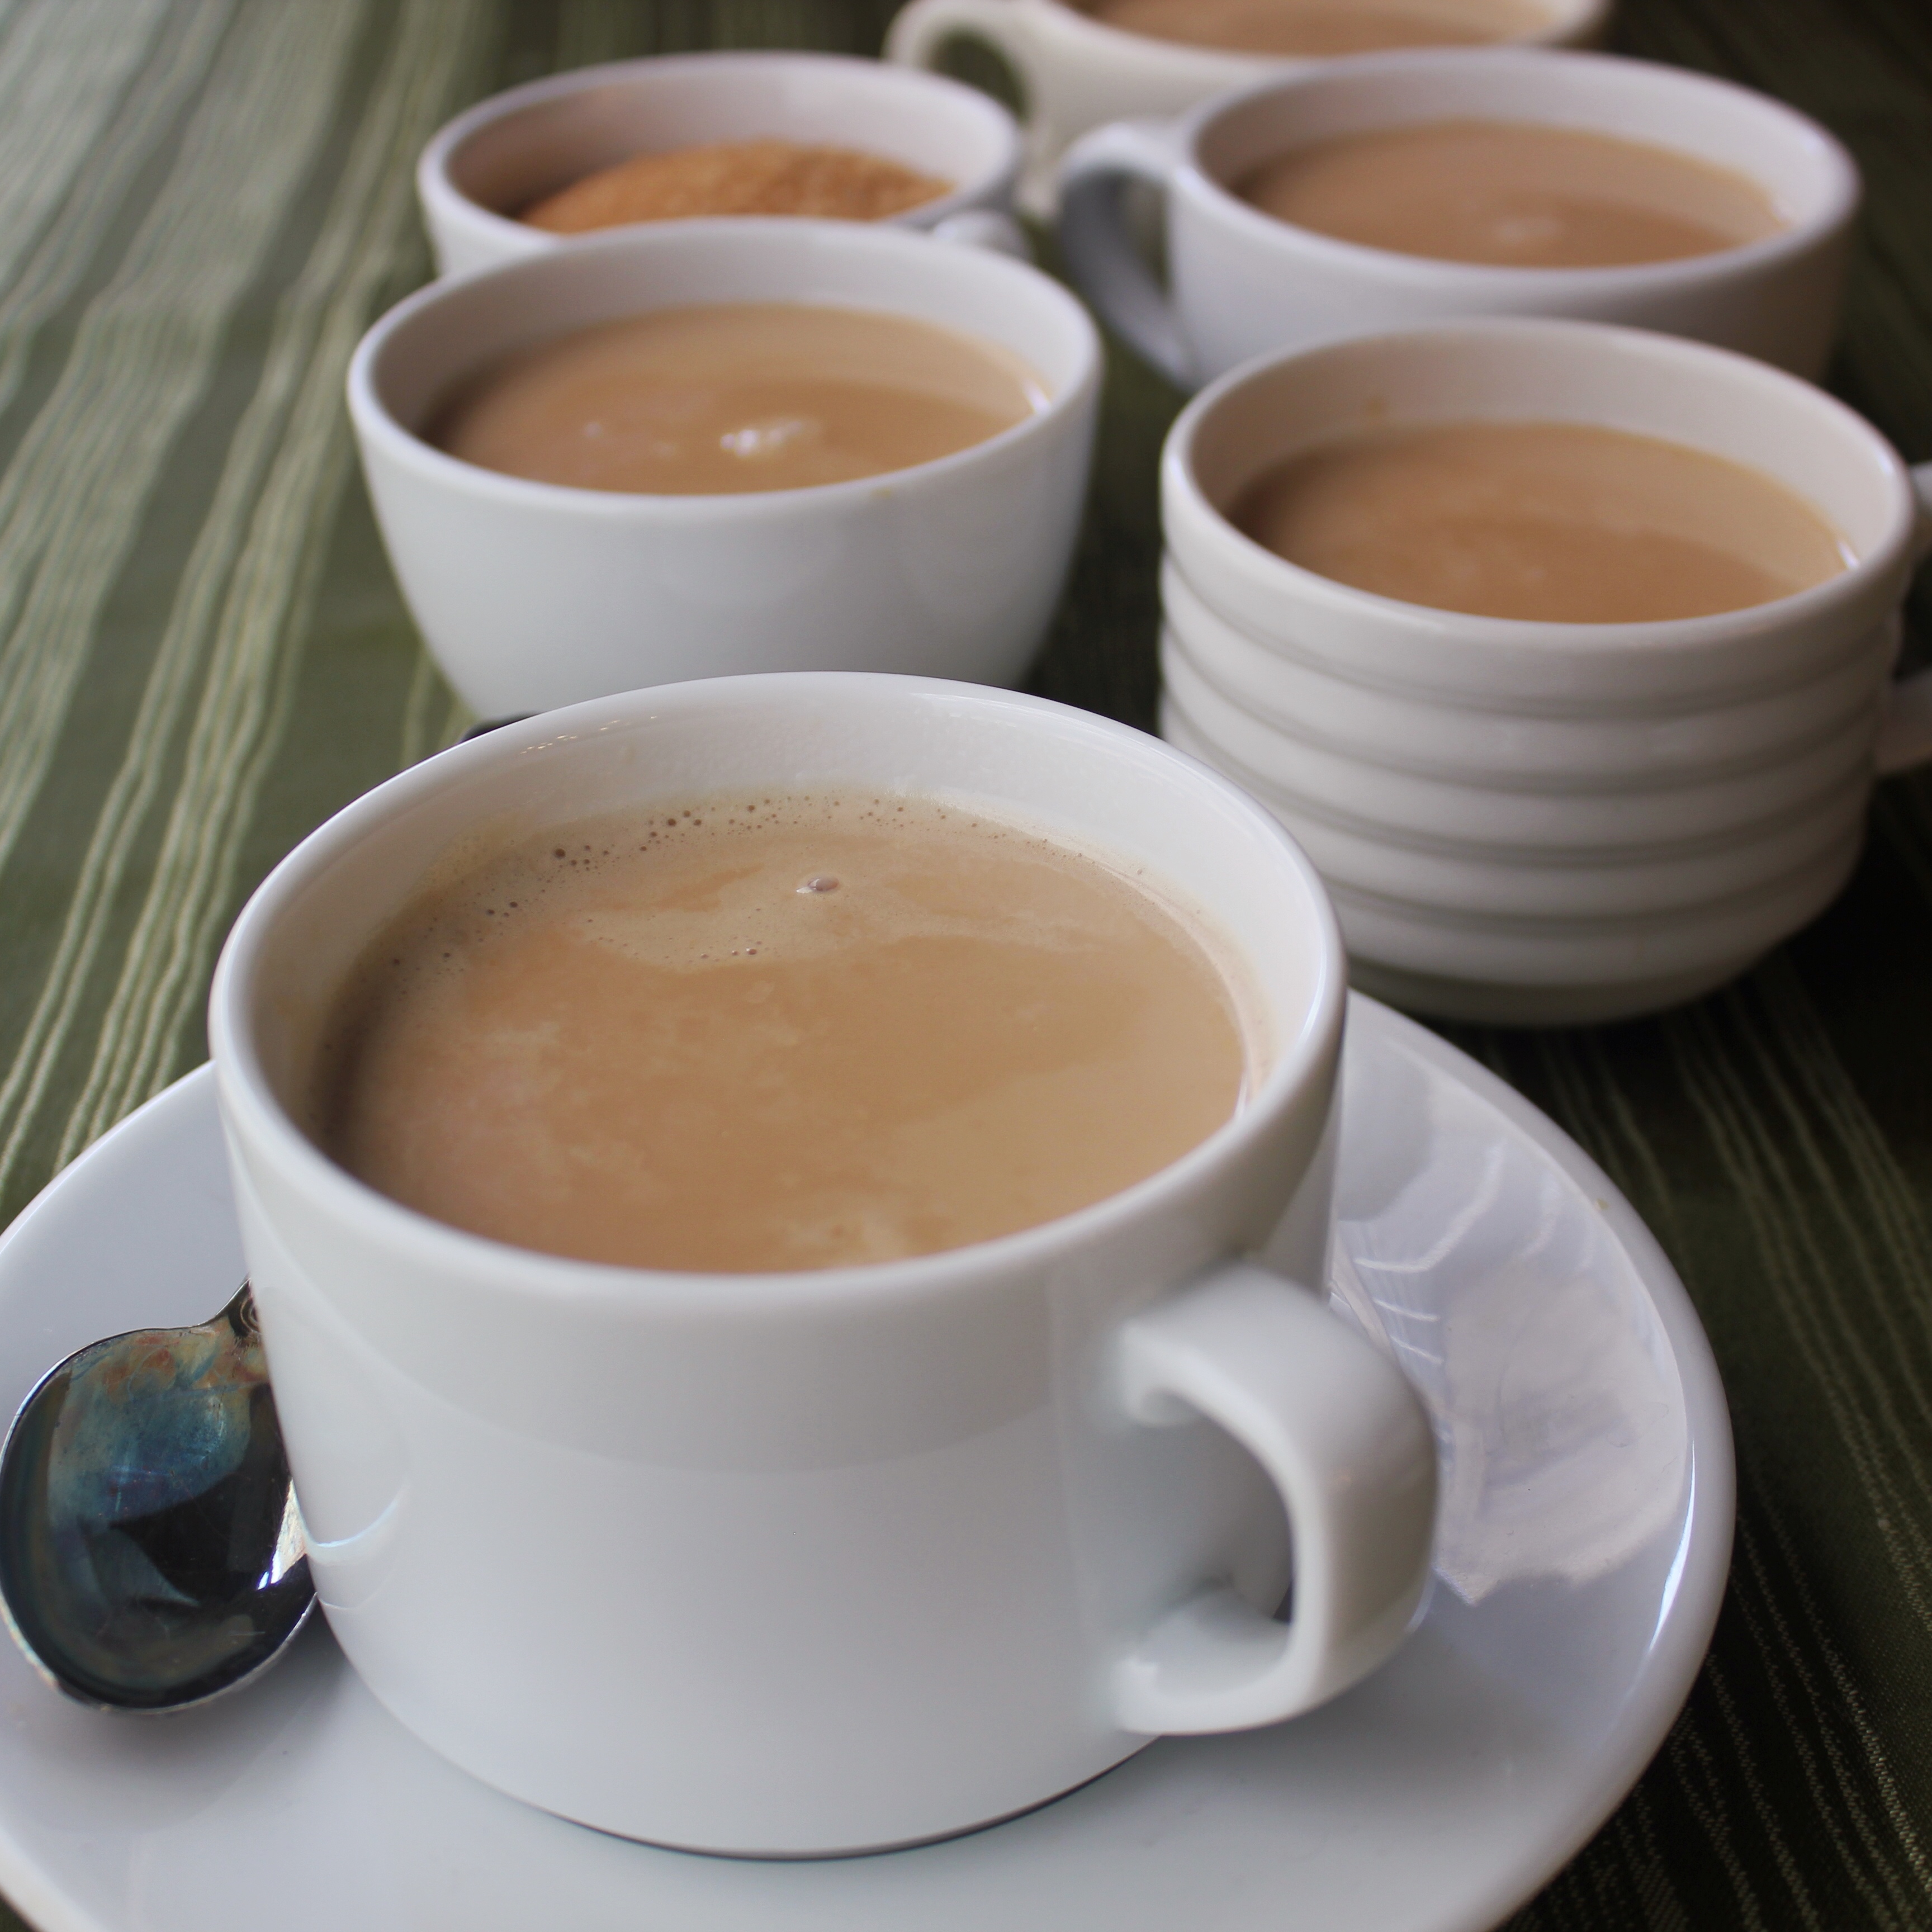 New Orleans Style Cafe Au Lait Recipe - Southern.